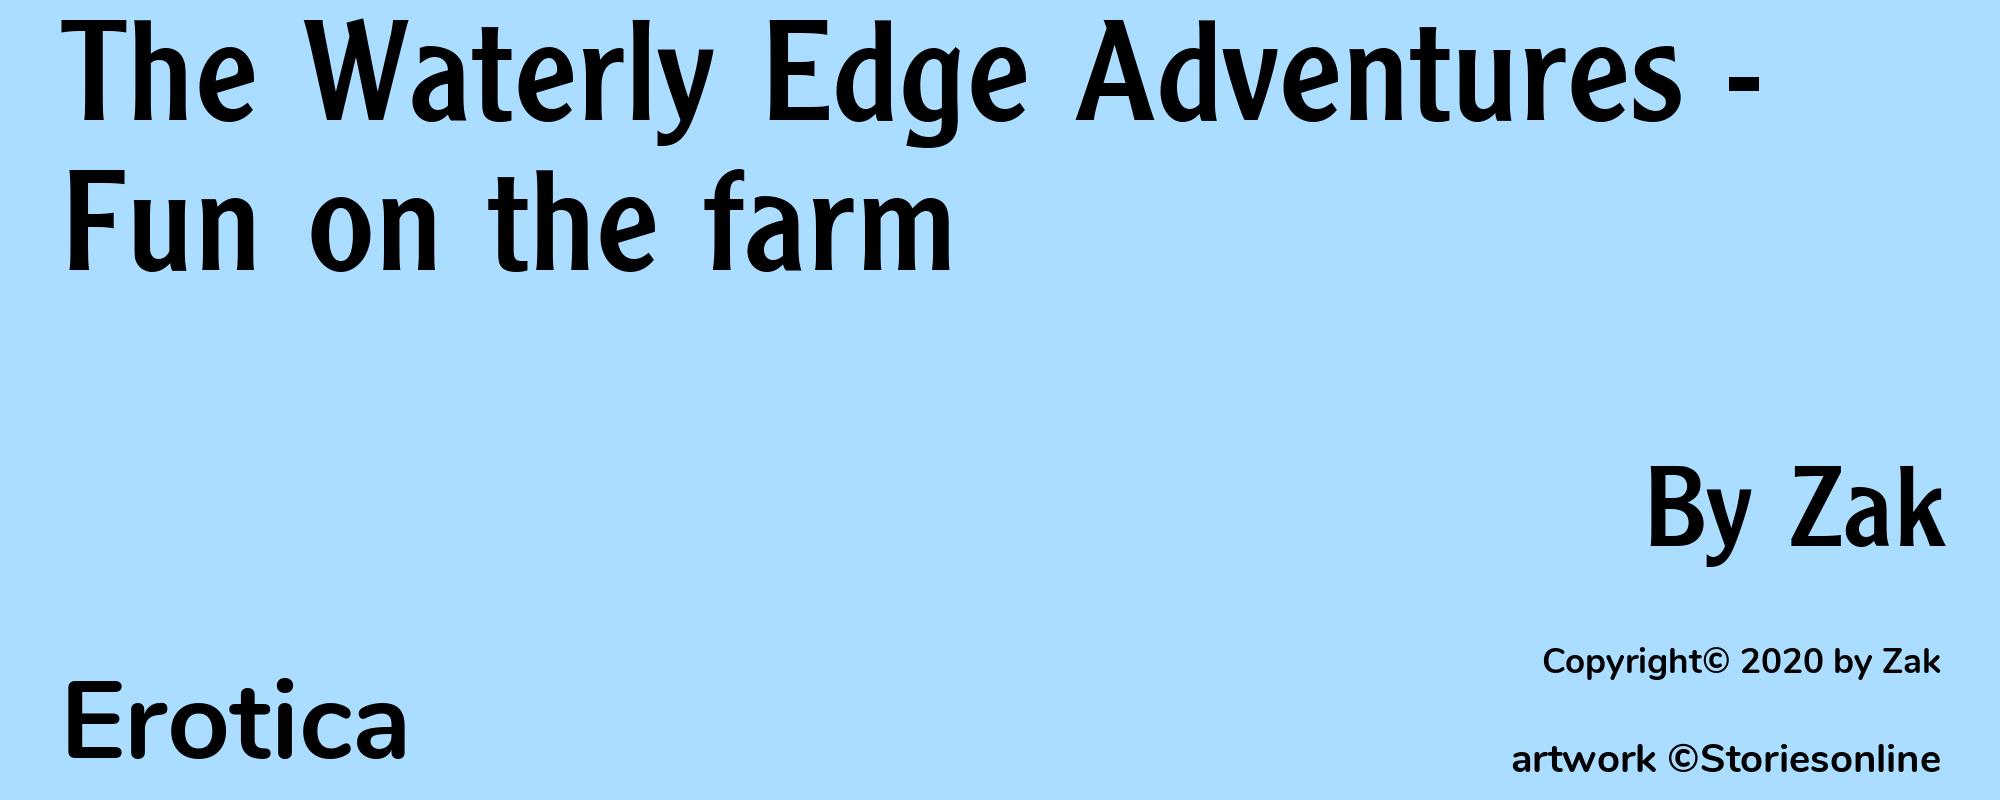 The Waterly Edge Adventures - Fun on the farm - Cover